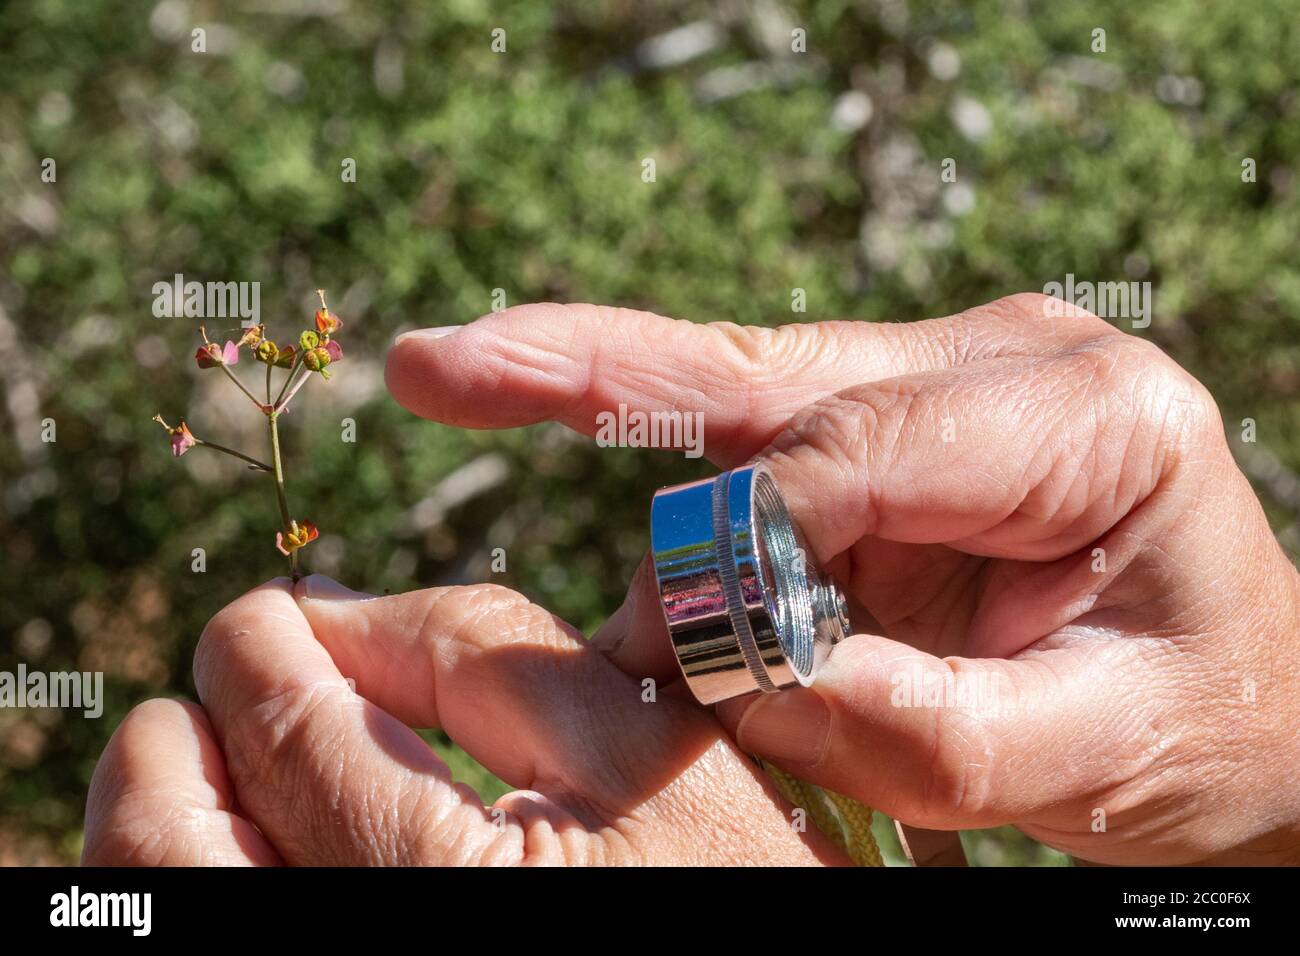 Botanist examining a plant flower using a hand lens Stock Photo